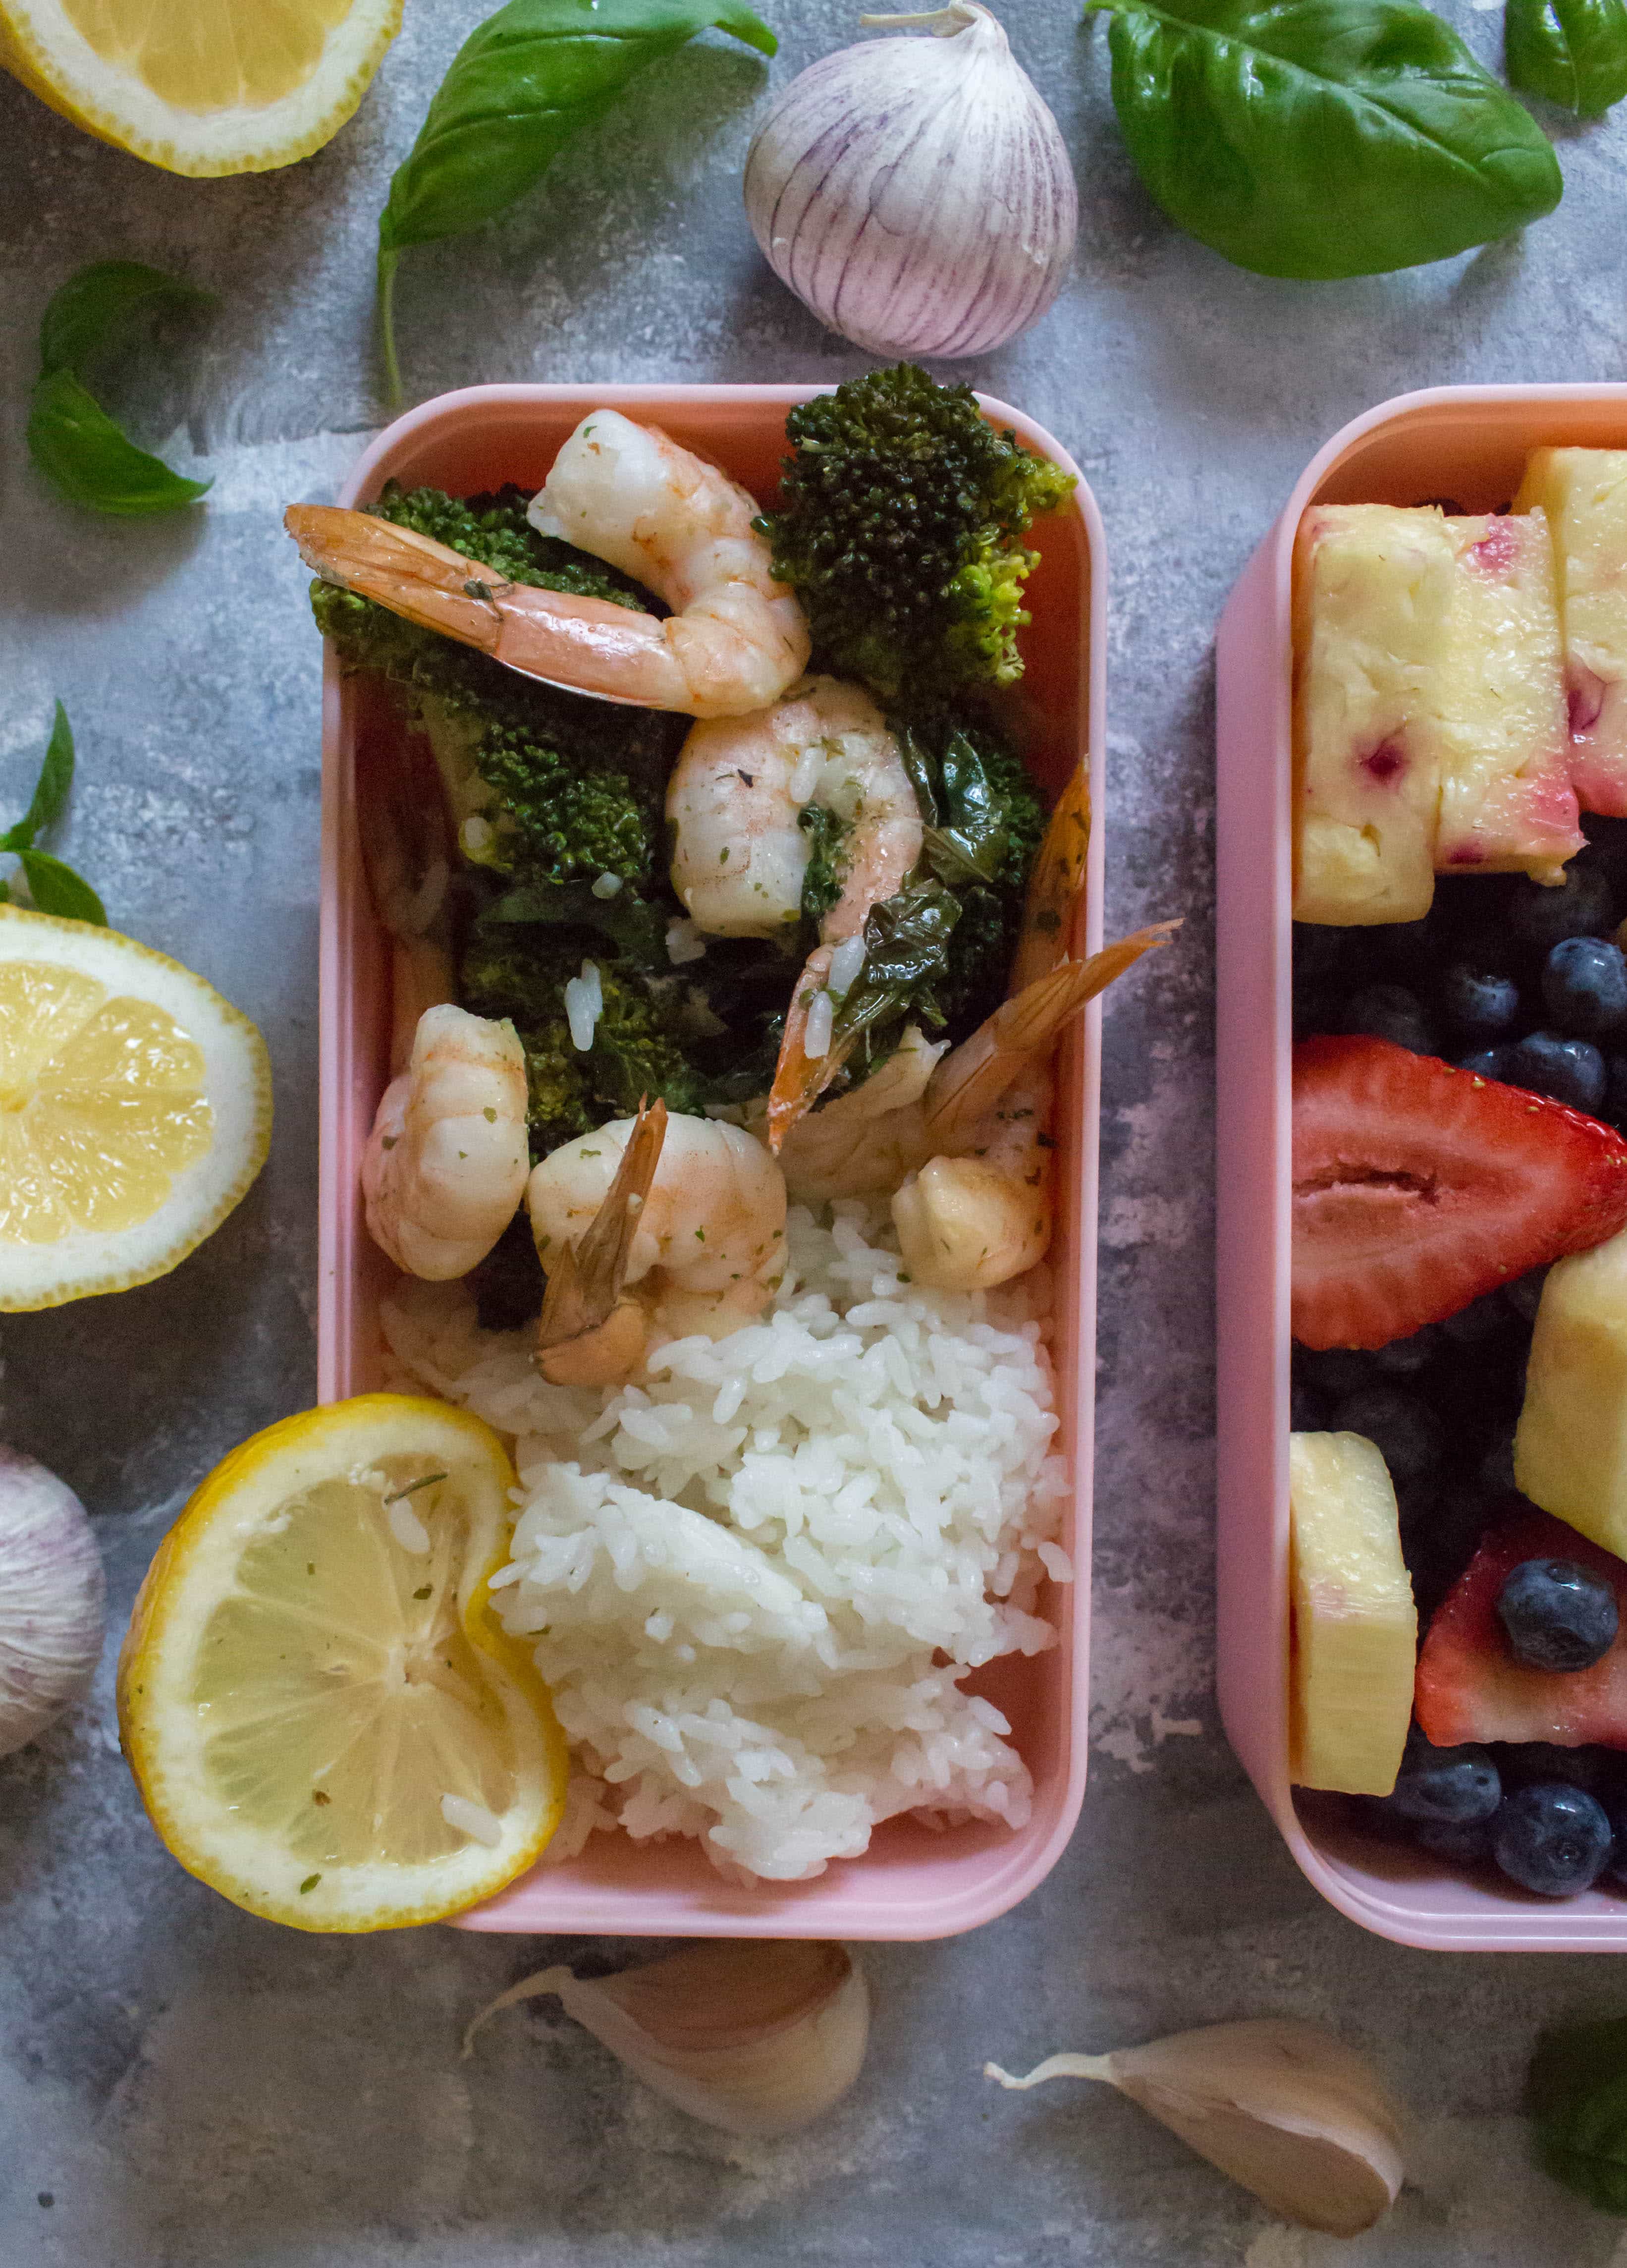 Have you ever want to just toss everything into the oven and just call it a day? Well this lemon herb shrimp and broccoli foil bake is made just for you!